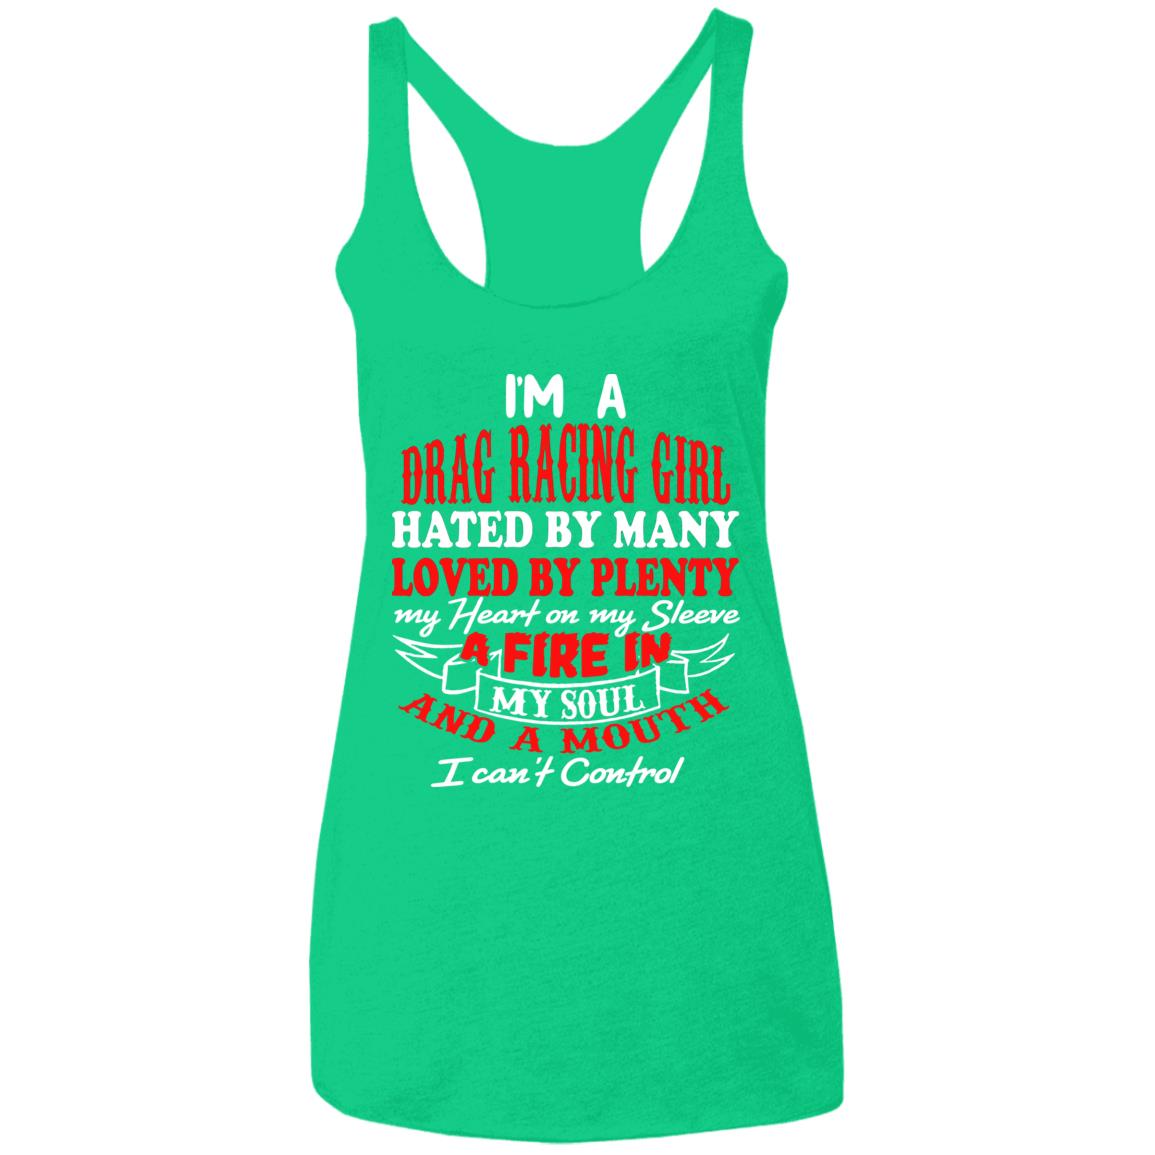 I'm A Drag Racing Girl Hated By Many Loved By Plenty Ladies' Triblend Racerback Tank